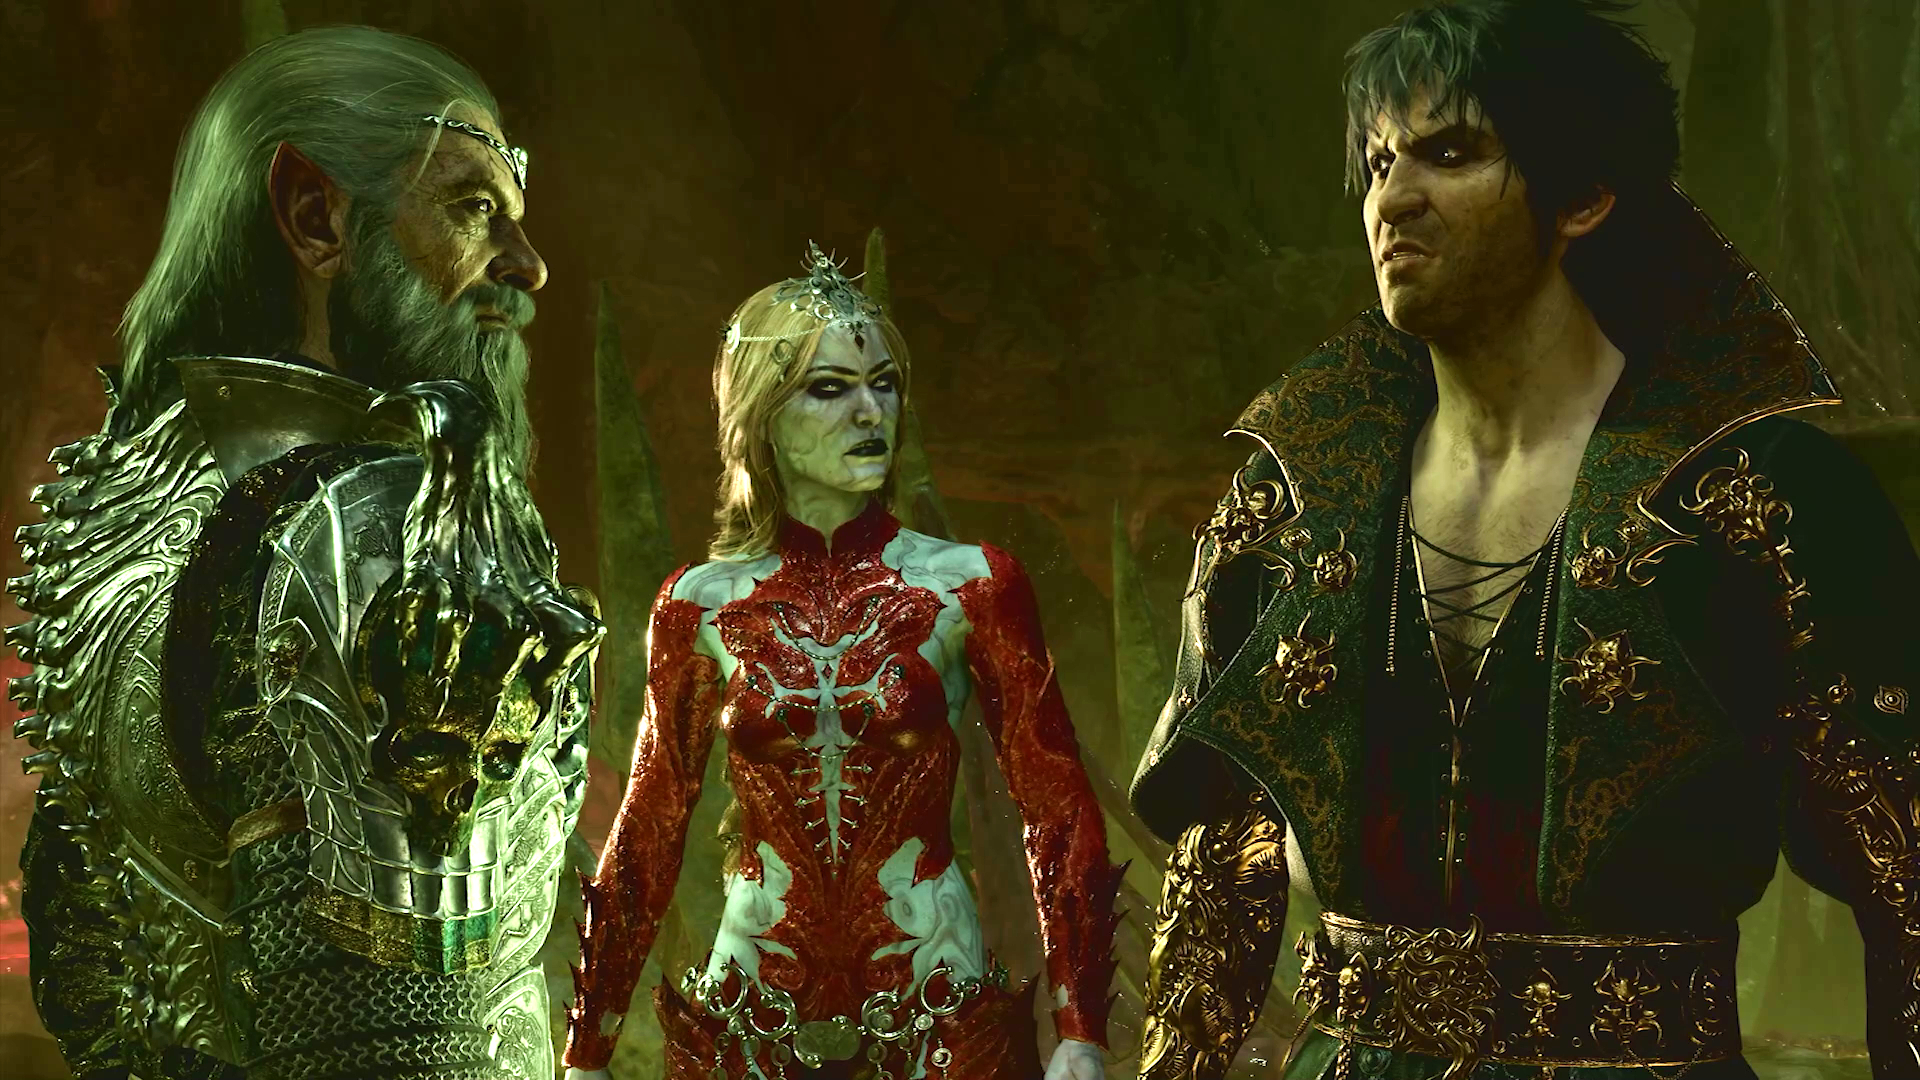 A blonde woman wearing a red and silver dress stands between one older, bearded man and a younger man